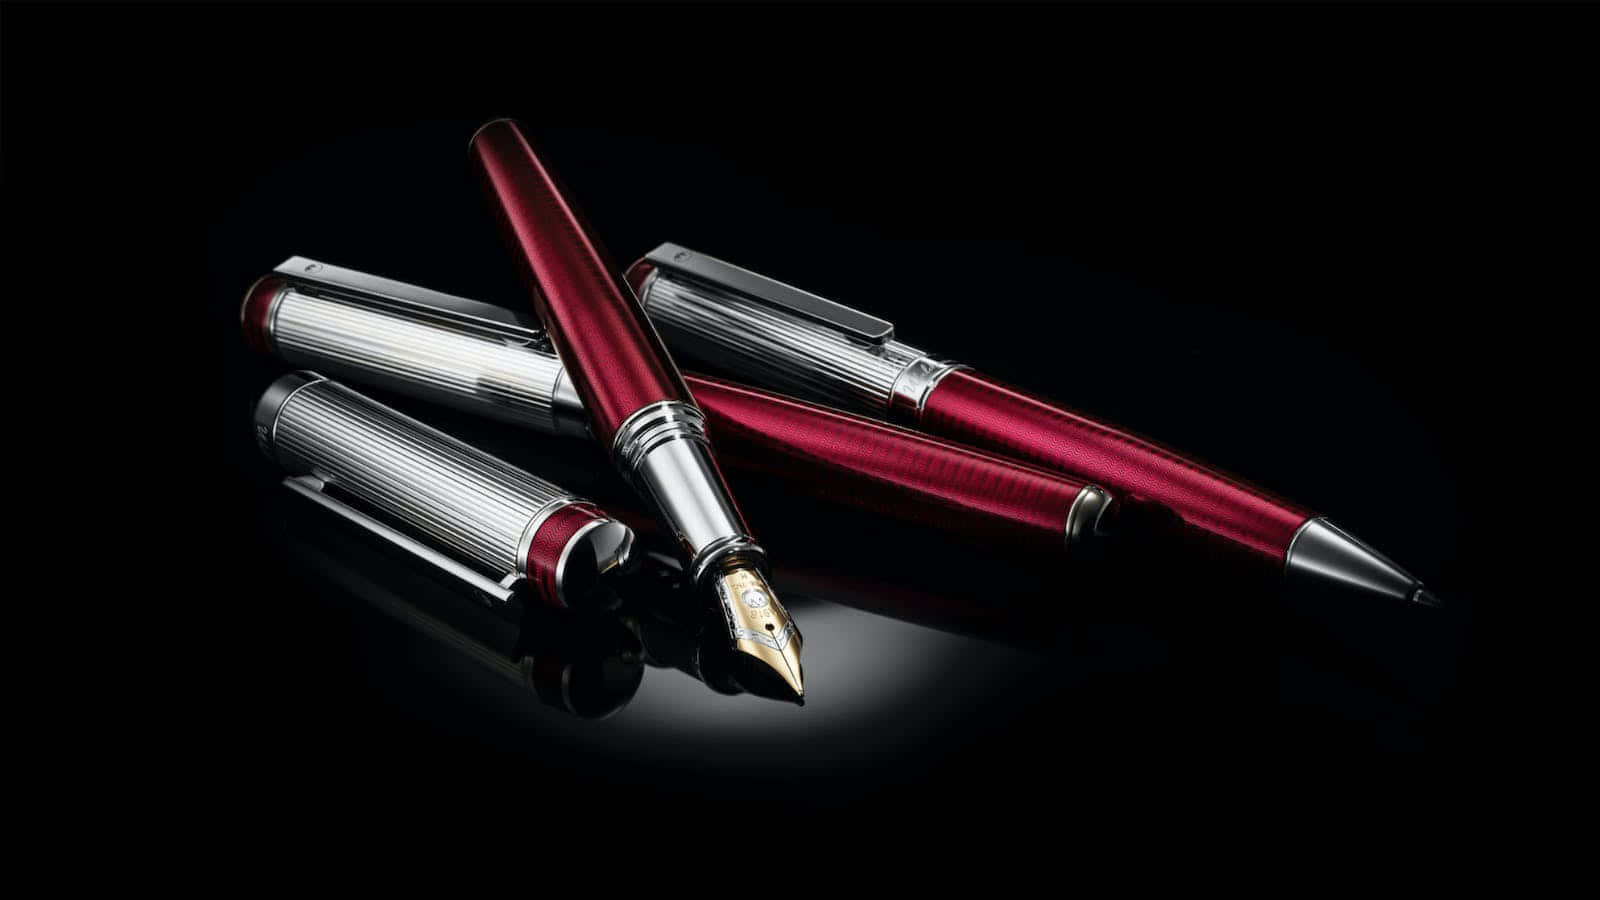 A Red Fountain Pen And A Silver Pen On A Black Surface